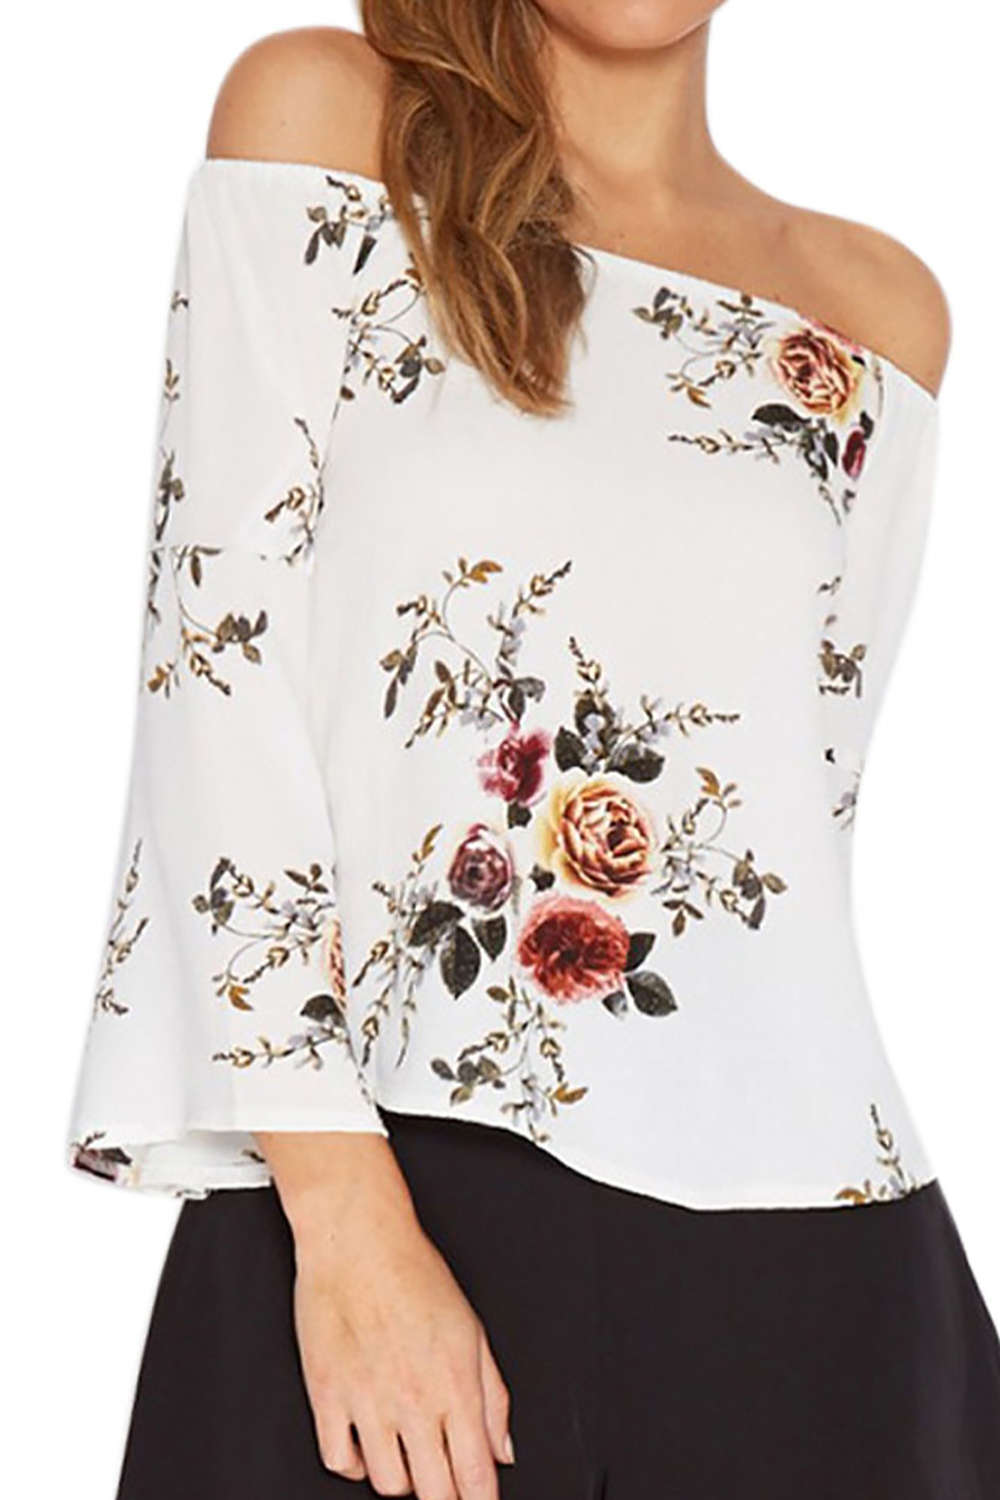 Iyasson Women's Casual Floral Off the Shoulder Bell Sleeve Chiffon Blouse